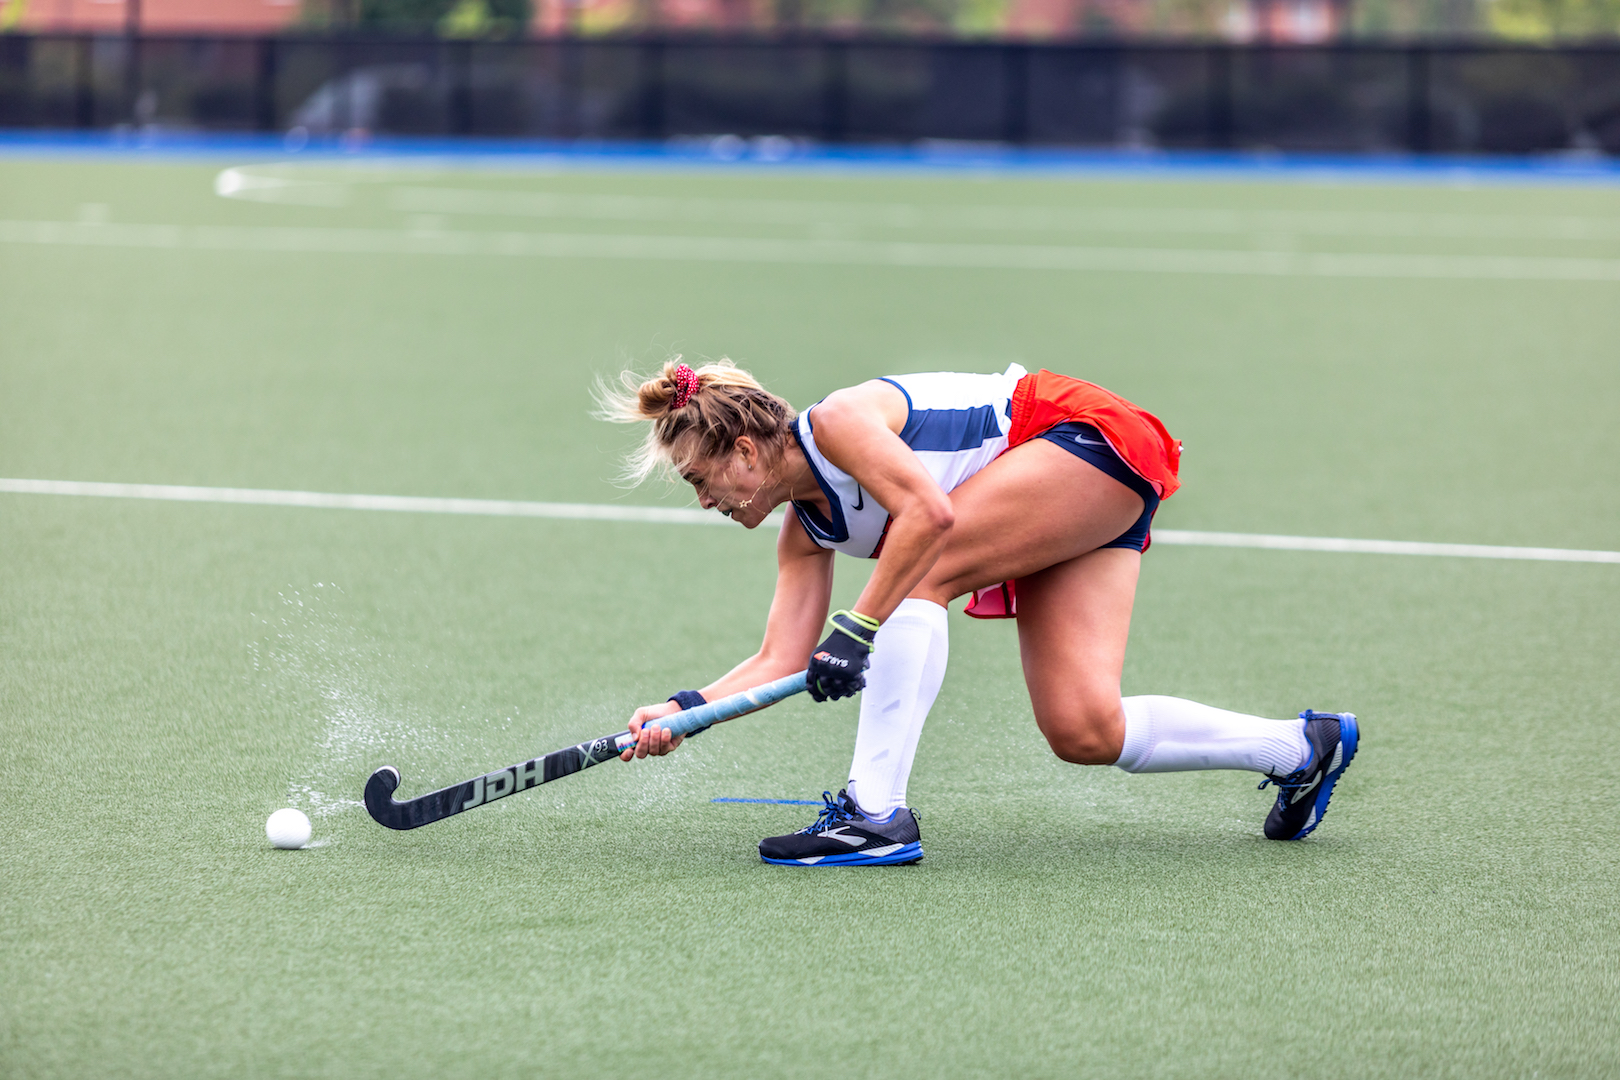 Liberty Field Hockey team wins first home game 5-2 against Appalachian